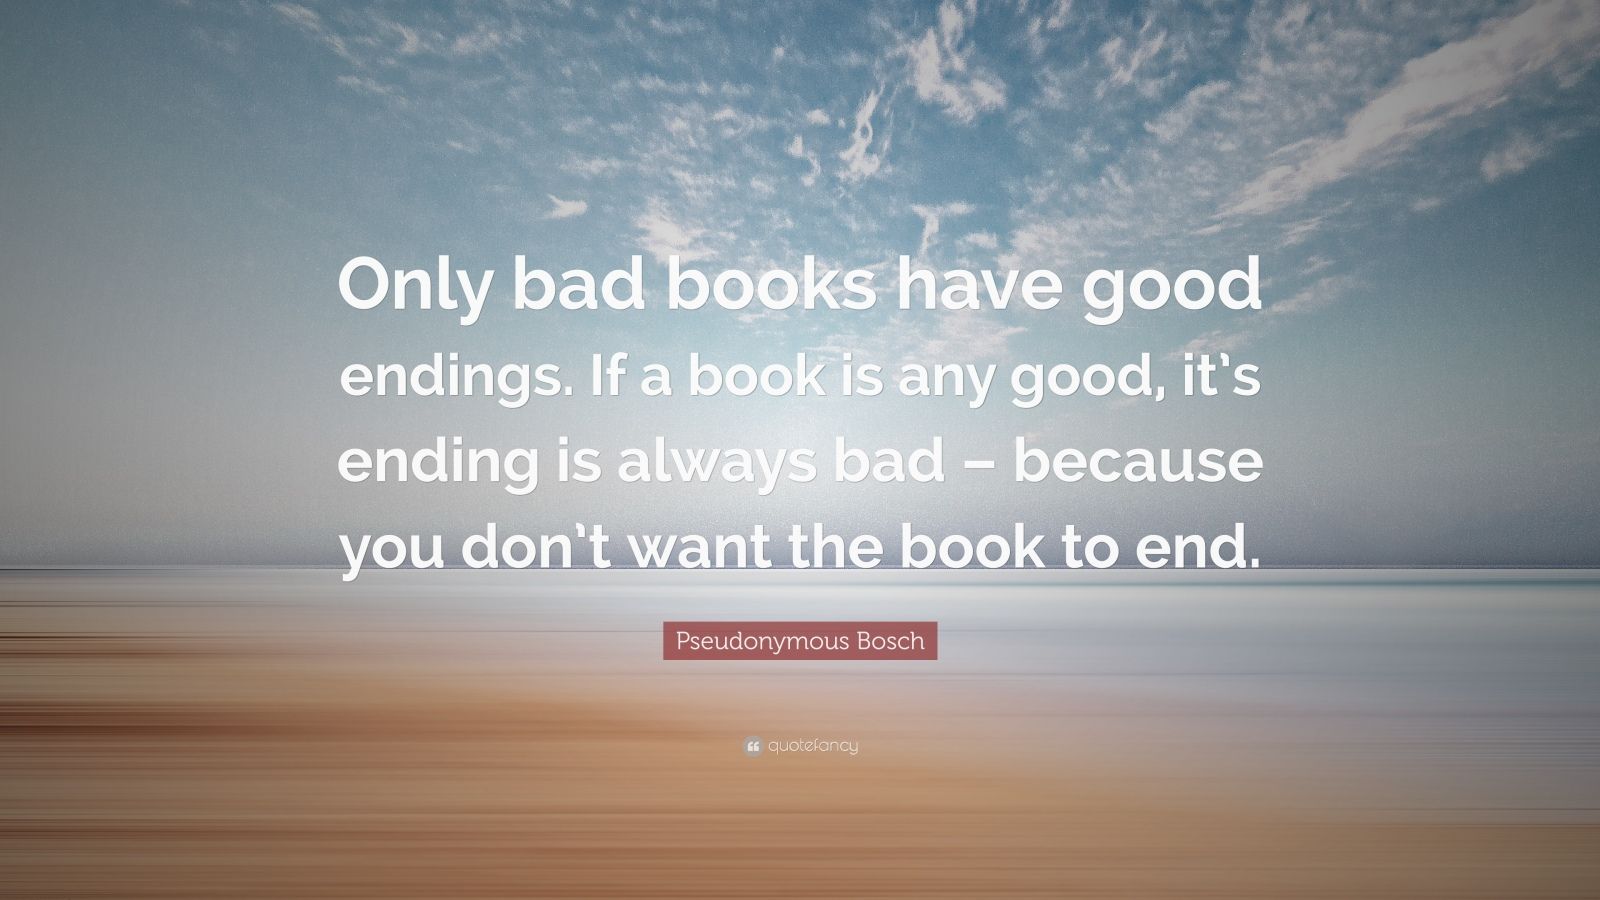 Pseudonymous Bosch Quote: “Only bad books have good endings. If a book